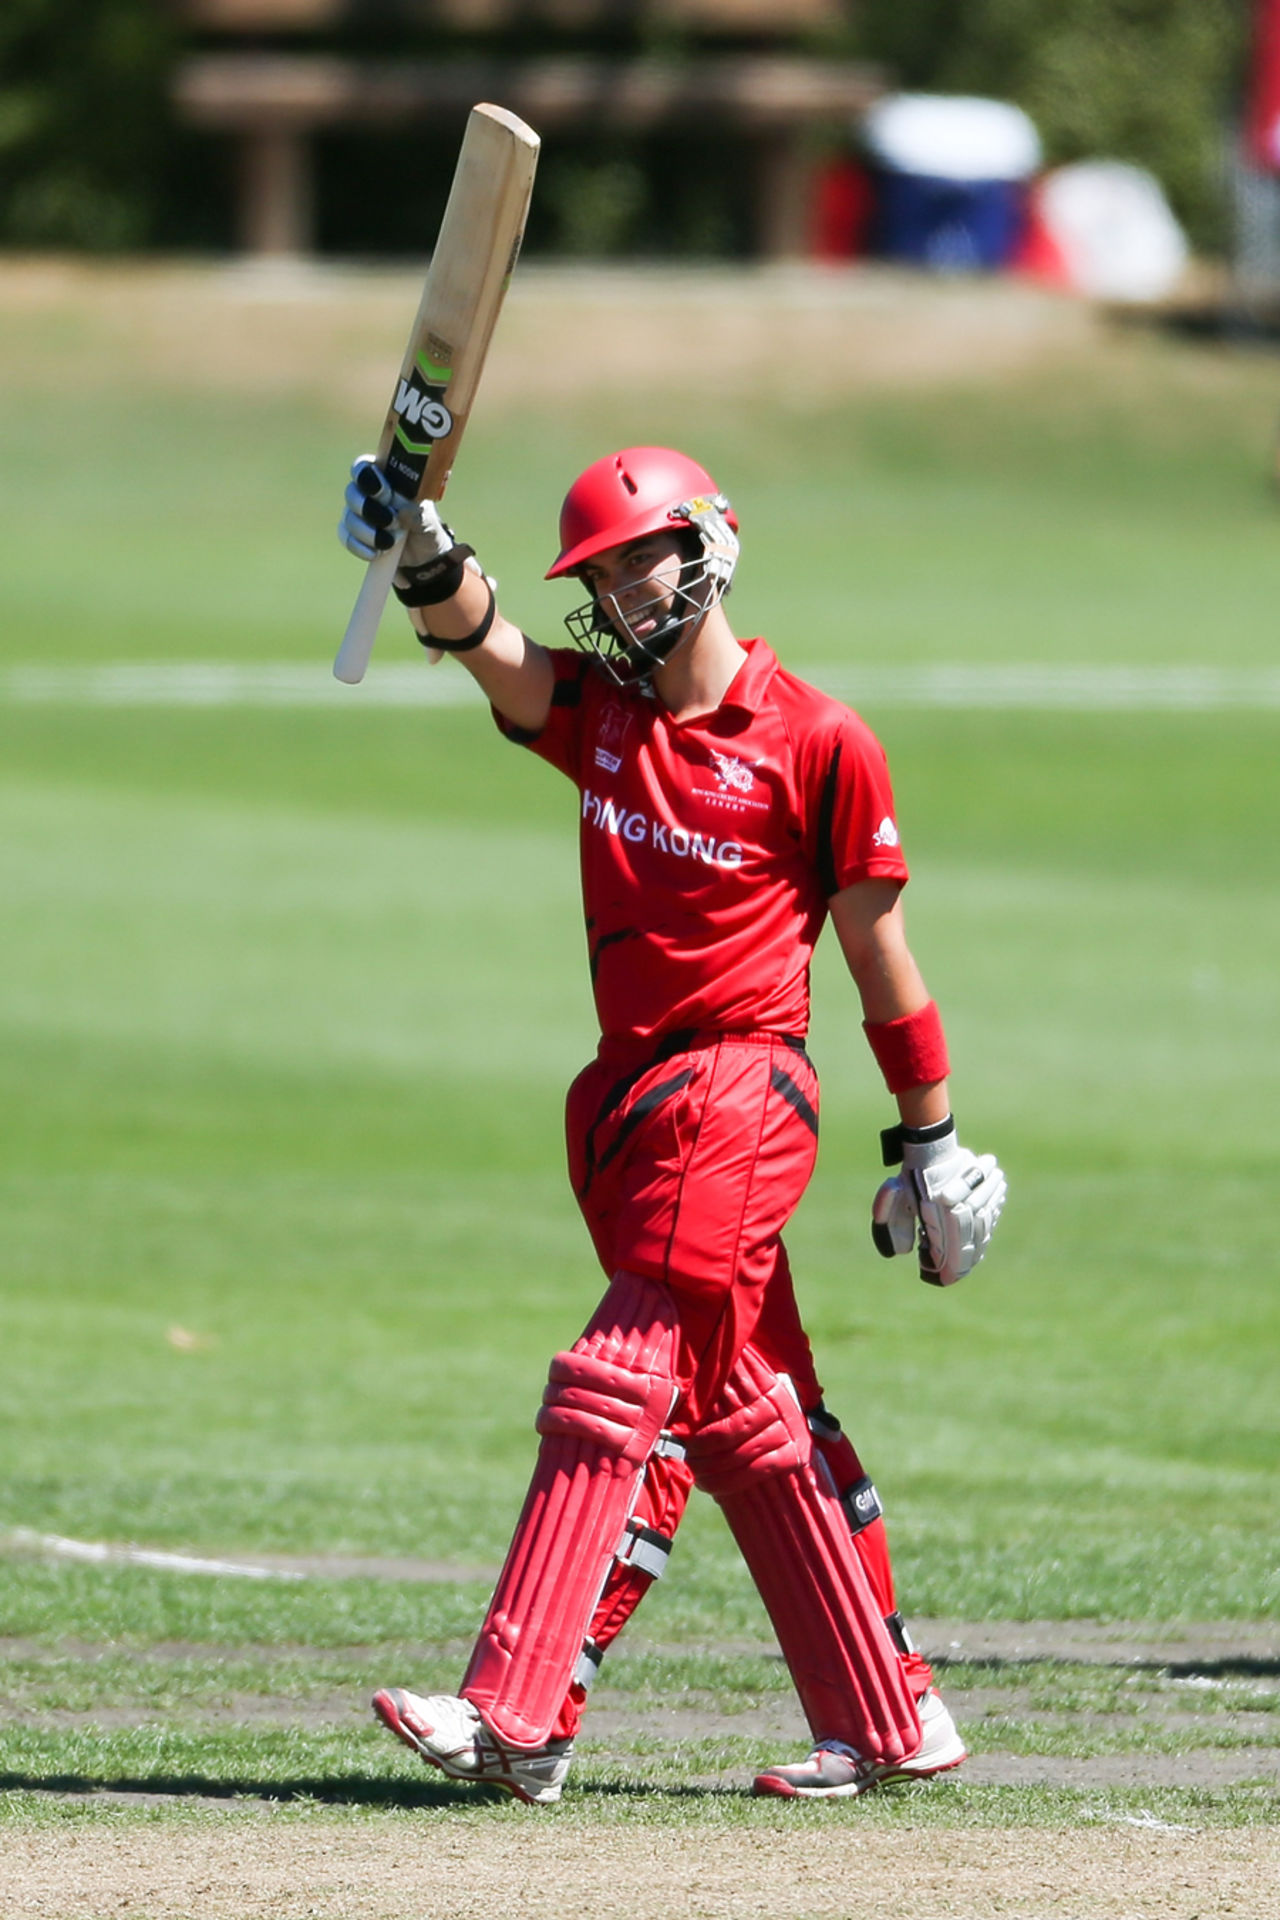 Mark Chapman acknowledges his half-century against Namibia in the Super Six match against Namibia at Rangiora Oval, New Zealand during the ICC Cricket World Cup Qualifier 2014